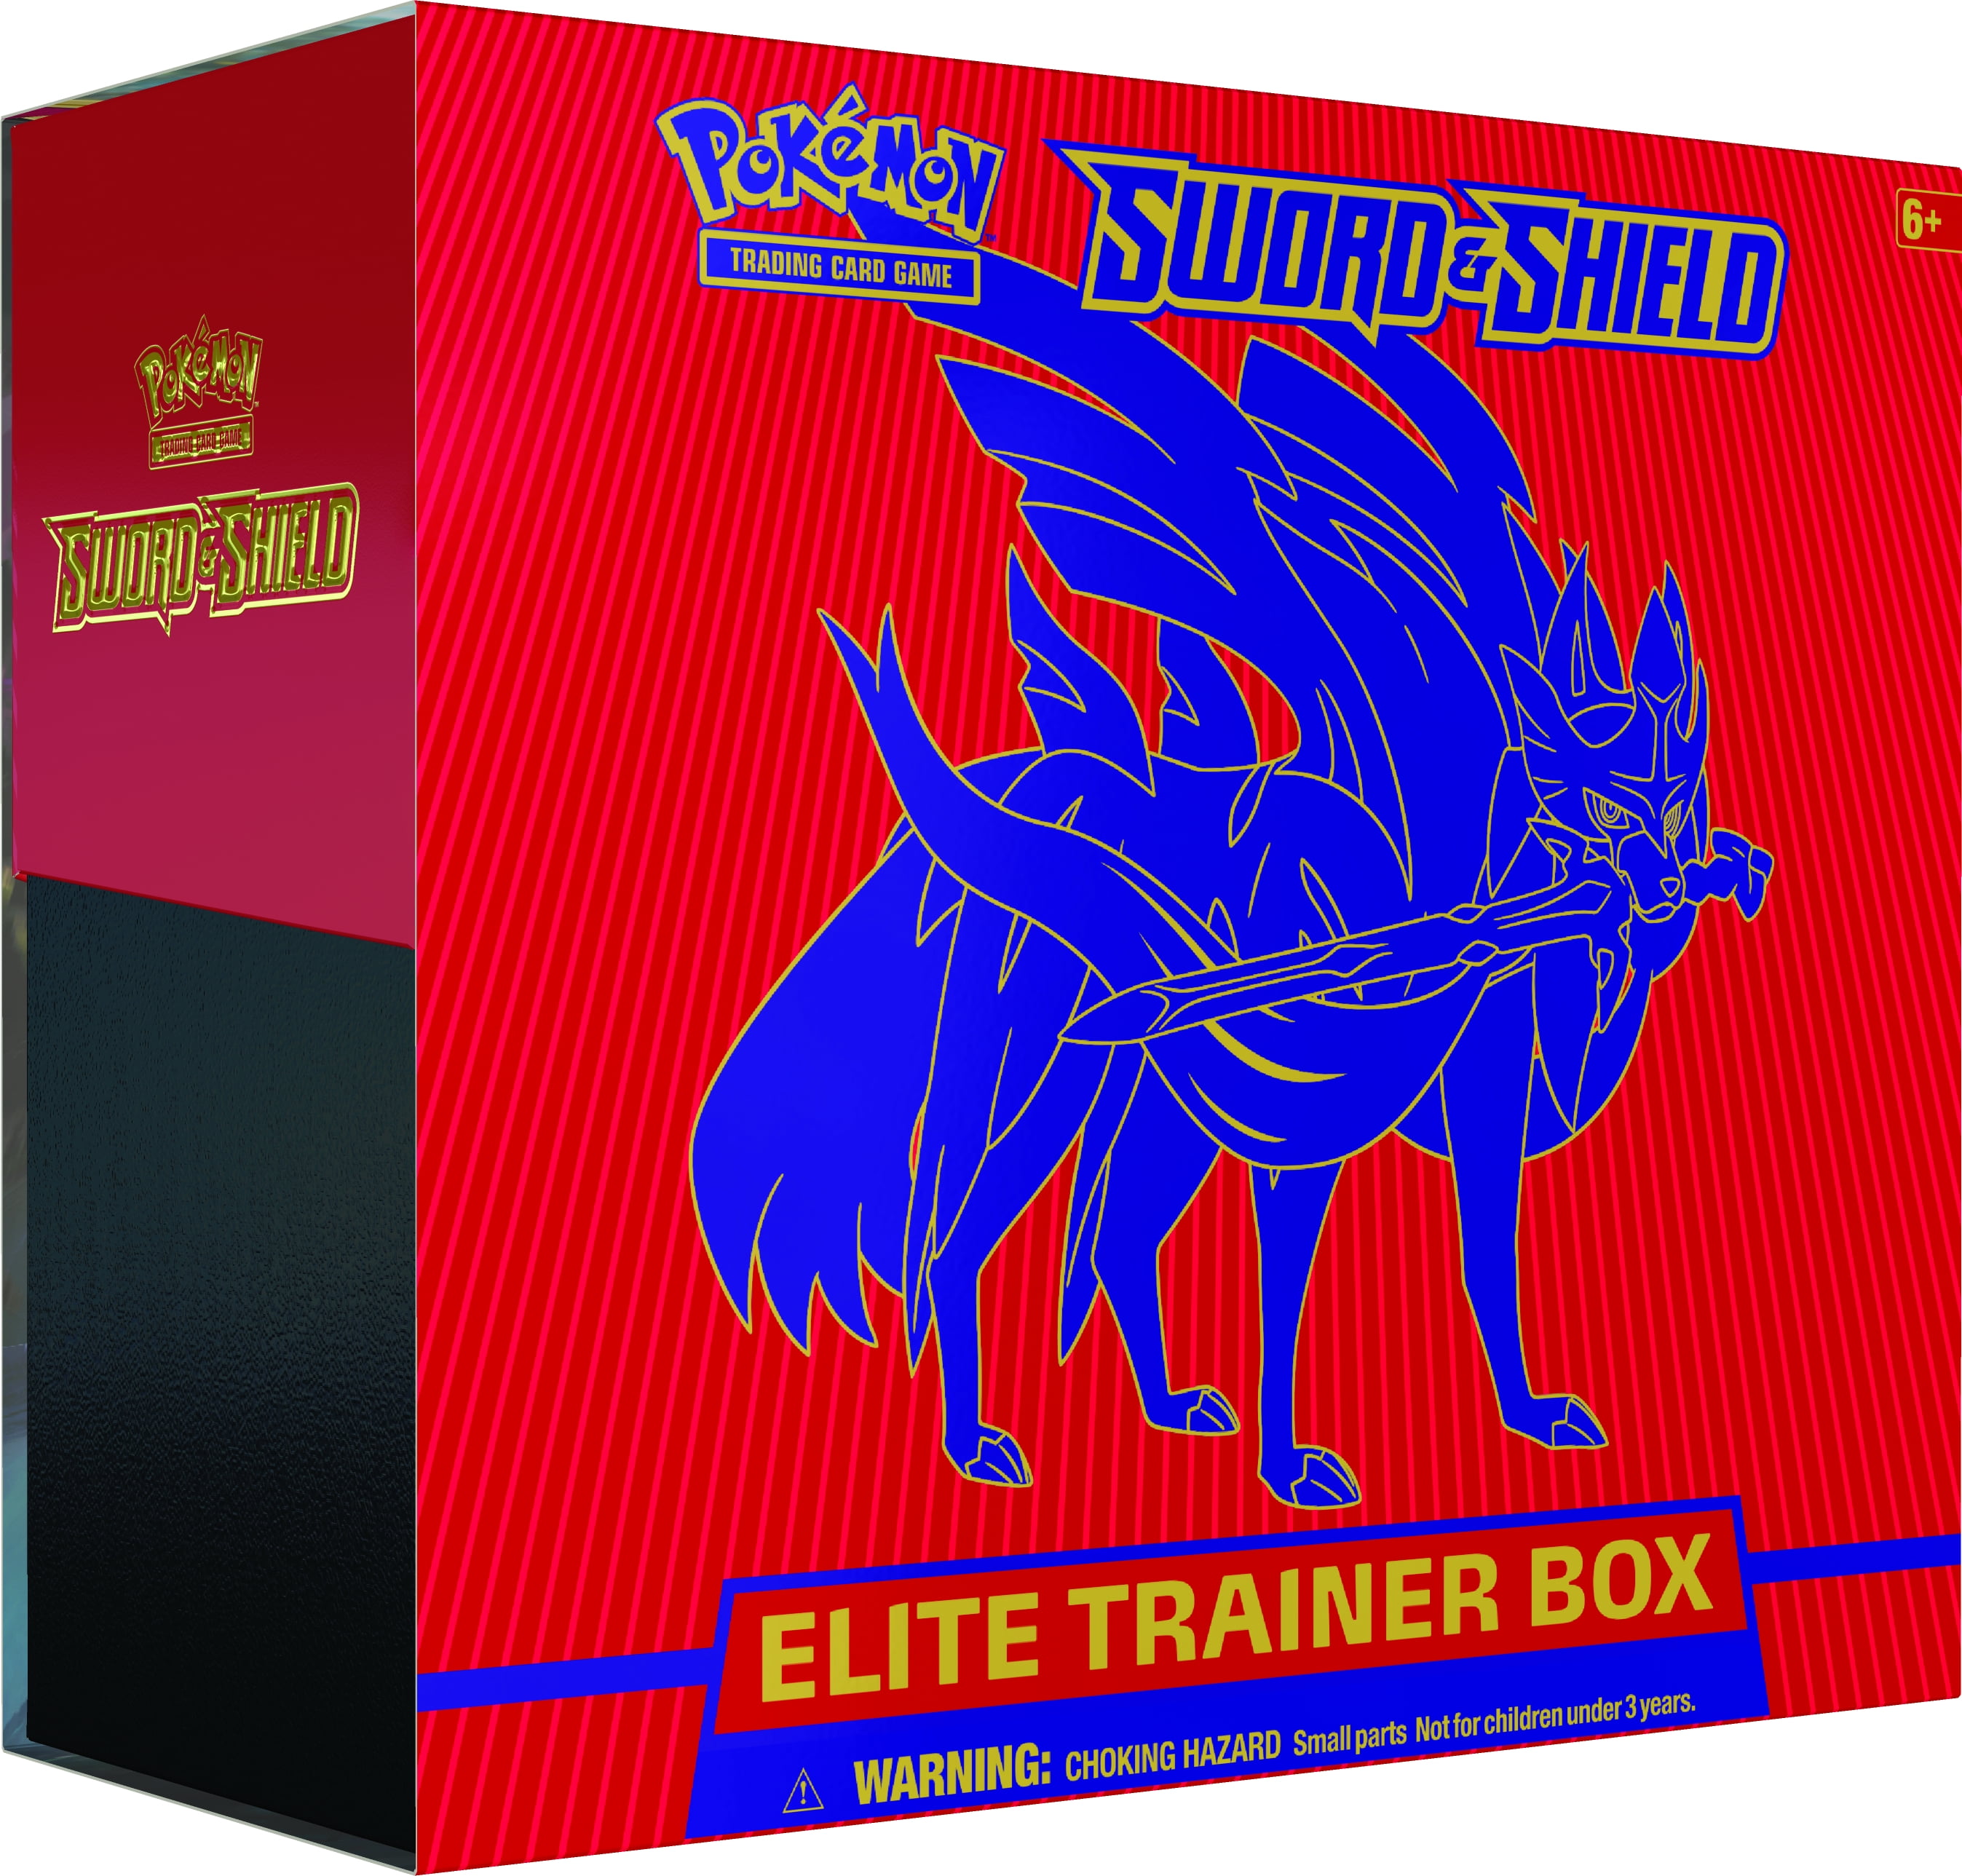 Sent by Email Trading Card Game Online Code Card Pokemon Vivid Voltage ETB 